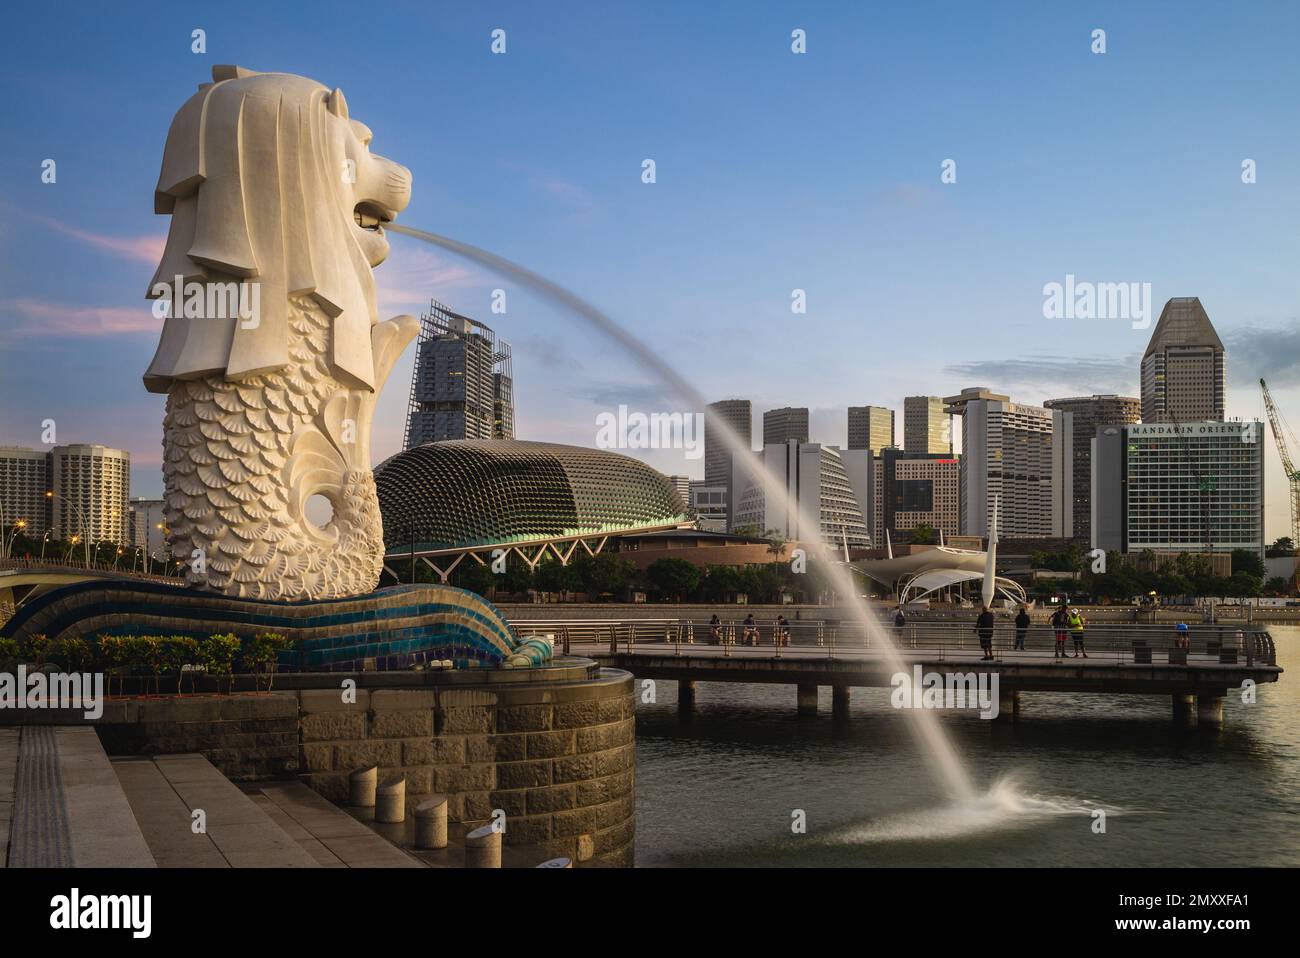 February 6, 2020: Merlion Statue at Marina Bay in singapore. The Merlion is the official mascot of singapore designed by Alec Fraser Brunner, widely u Stock Photo